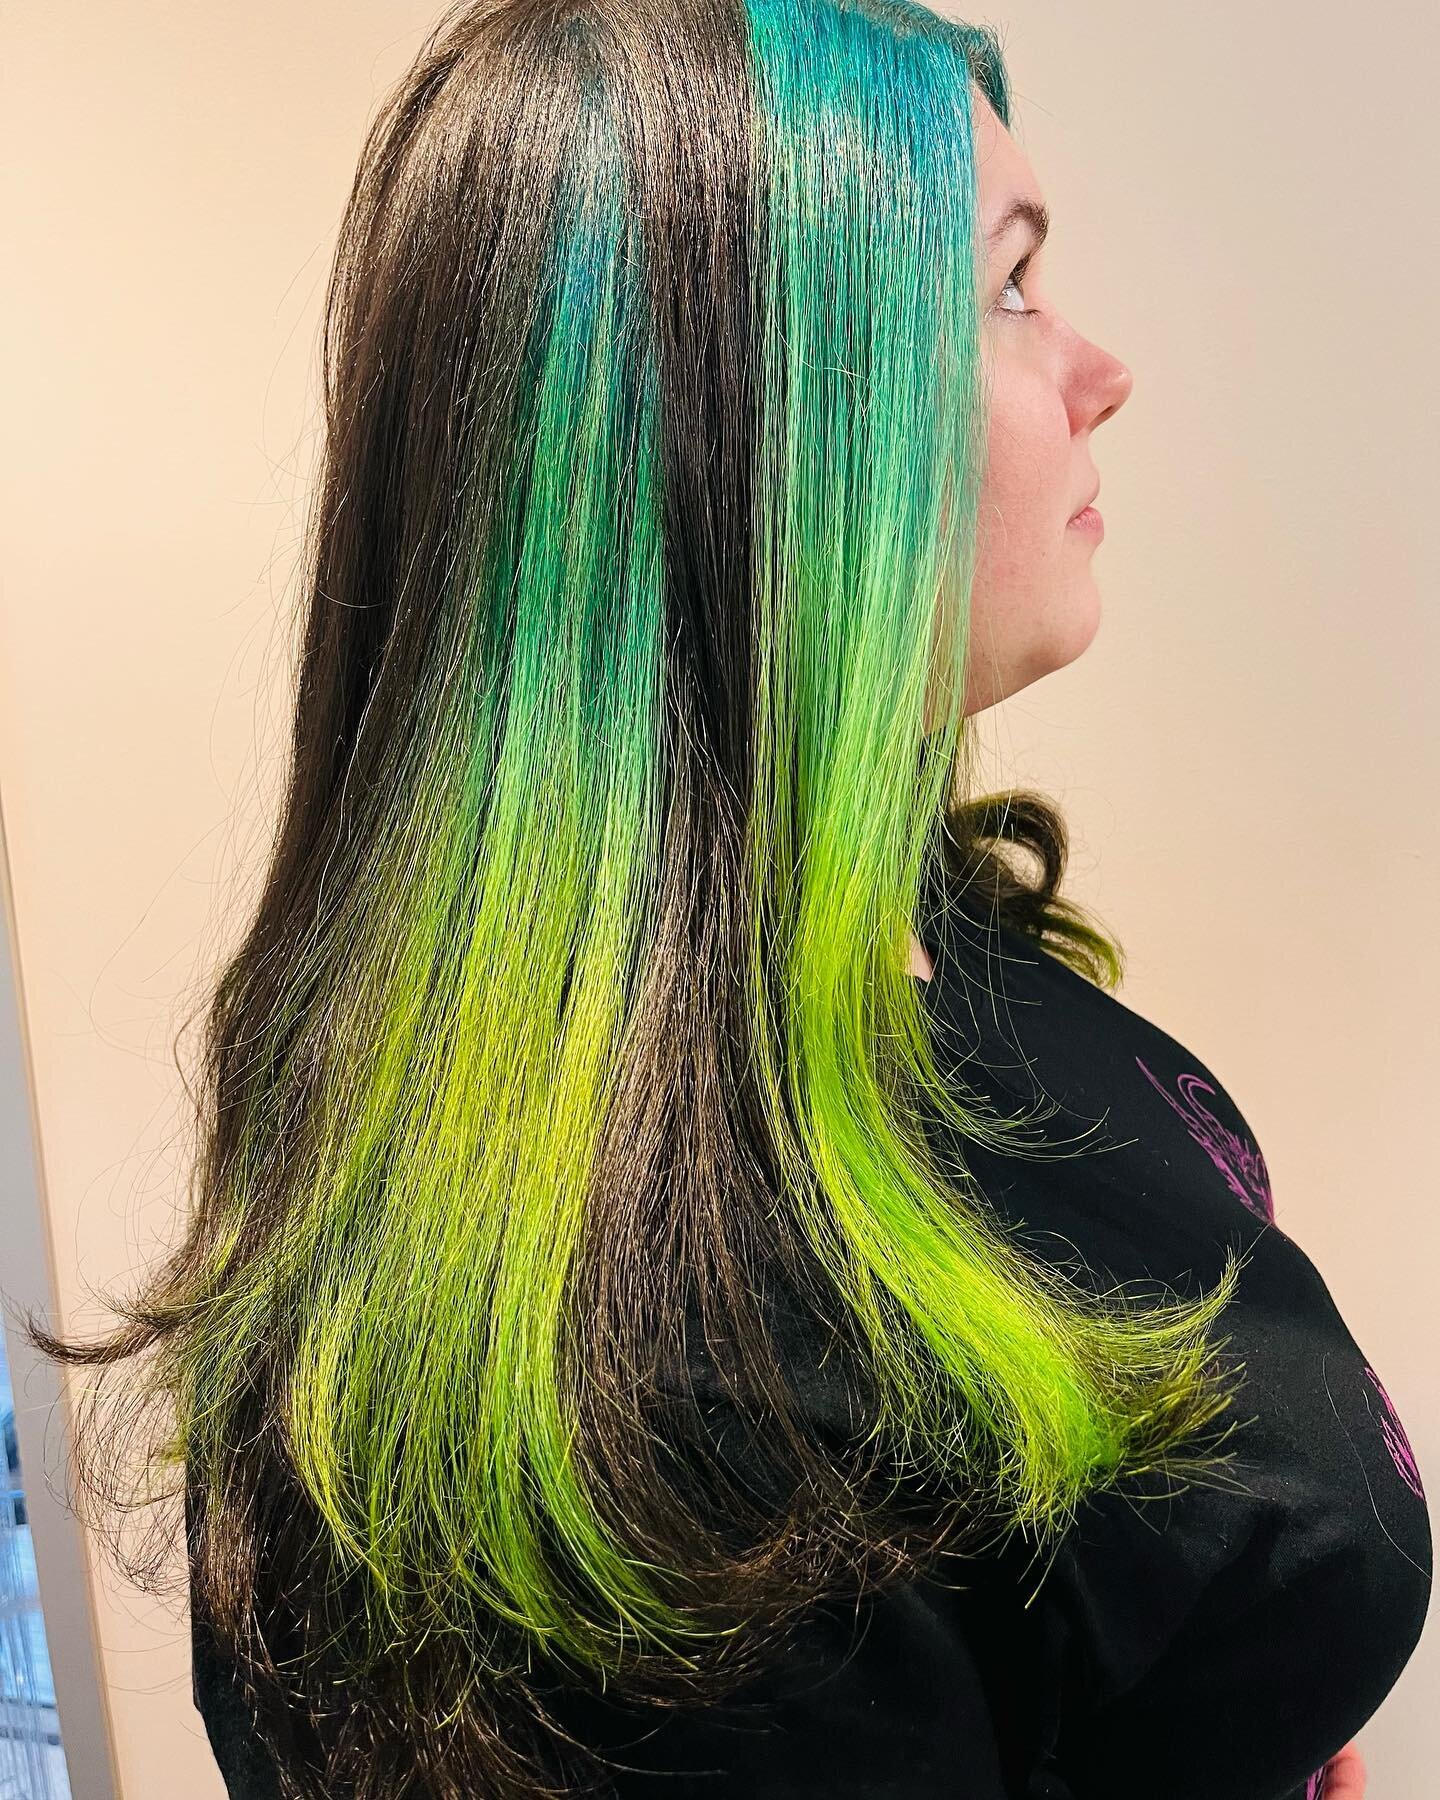 She got new colors! Refreshed @ladylasagna666 with all these different greens!💙💚💛